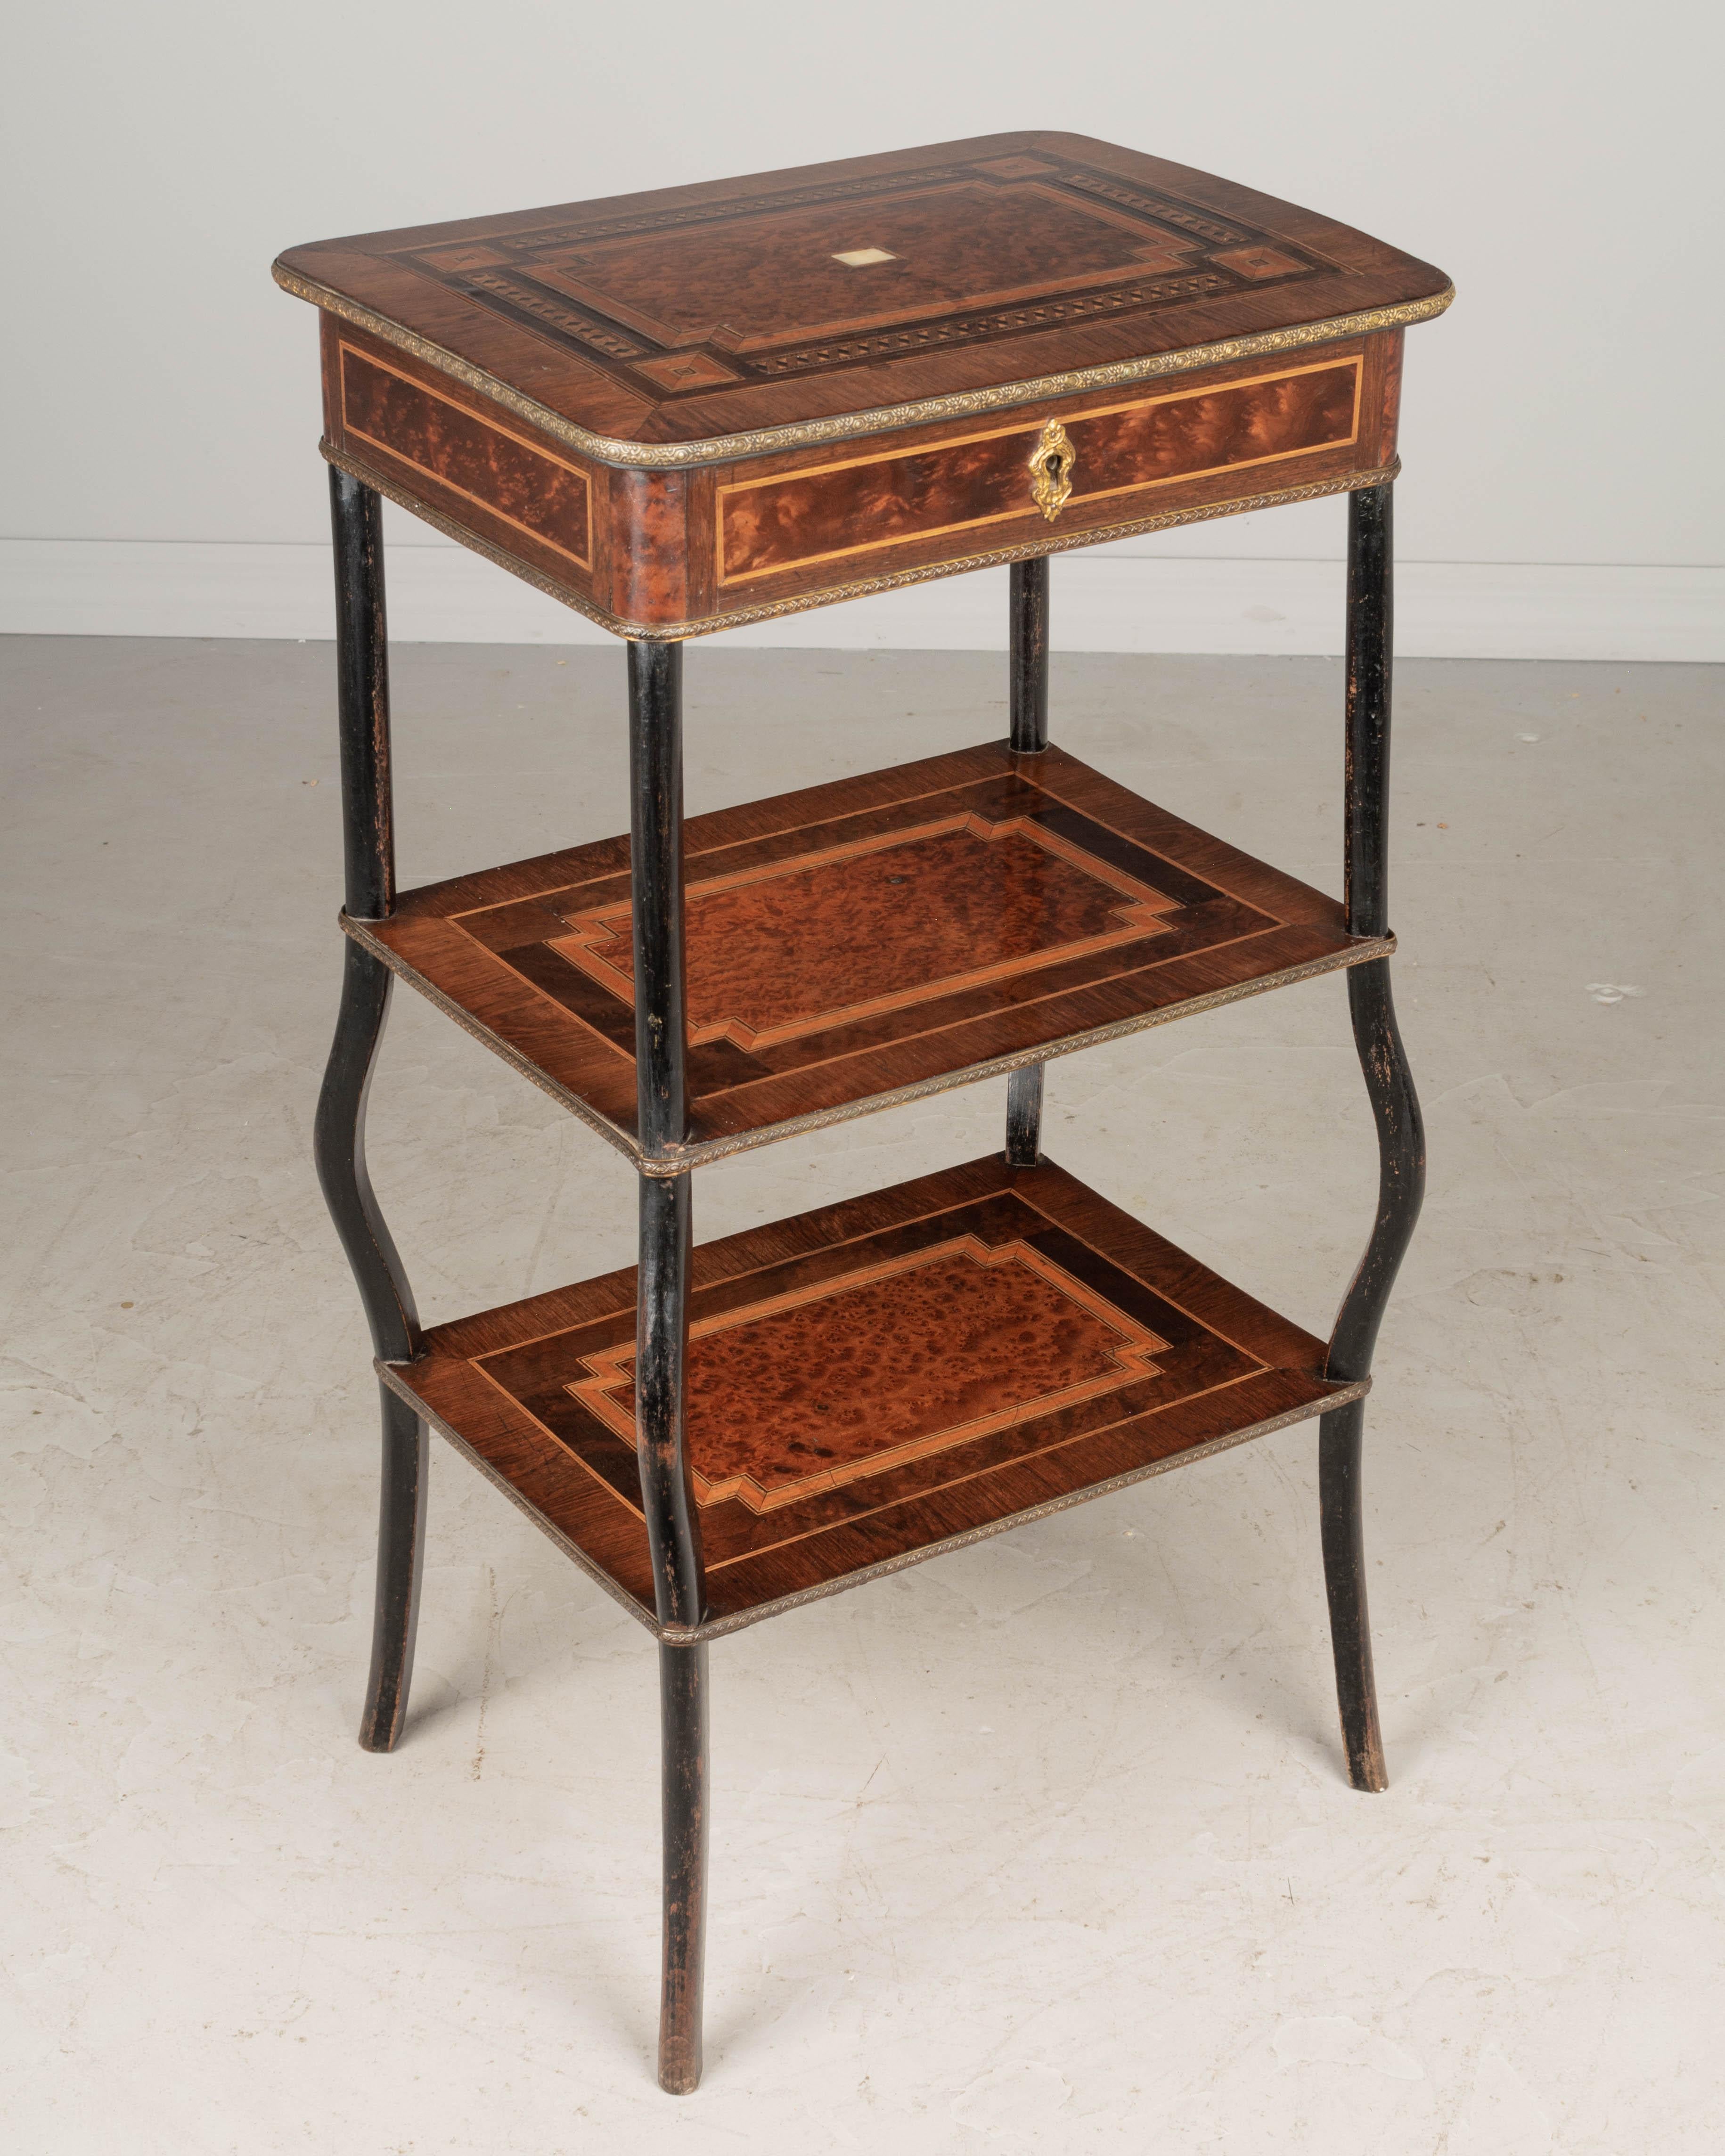 A late 19th Century French Napoleon III marquetry tiered table, hand-crafted with inlaid veneers of mahogany, walnut and burled walnut with inset mother-of-pearl and decorative brass trim. Finished on all four side with sturdy mahogany legs